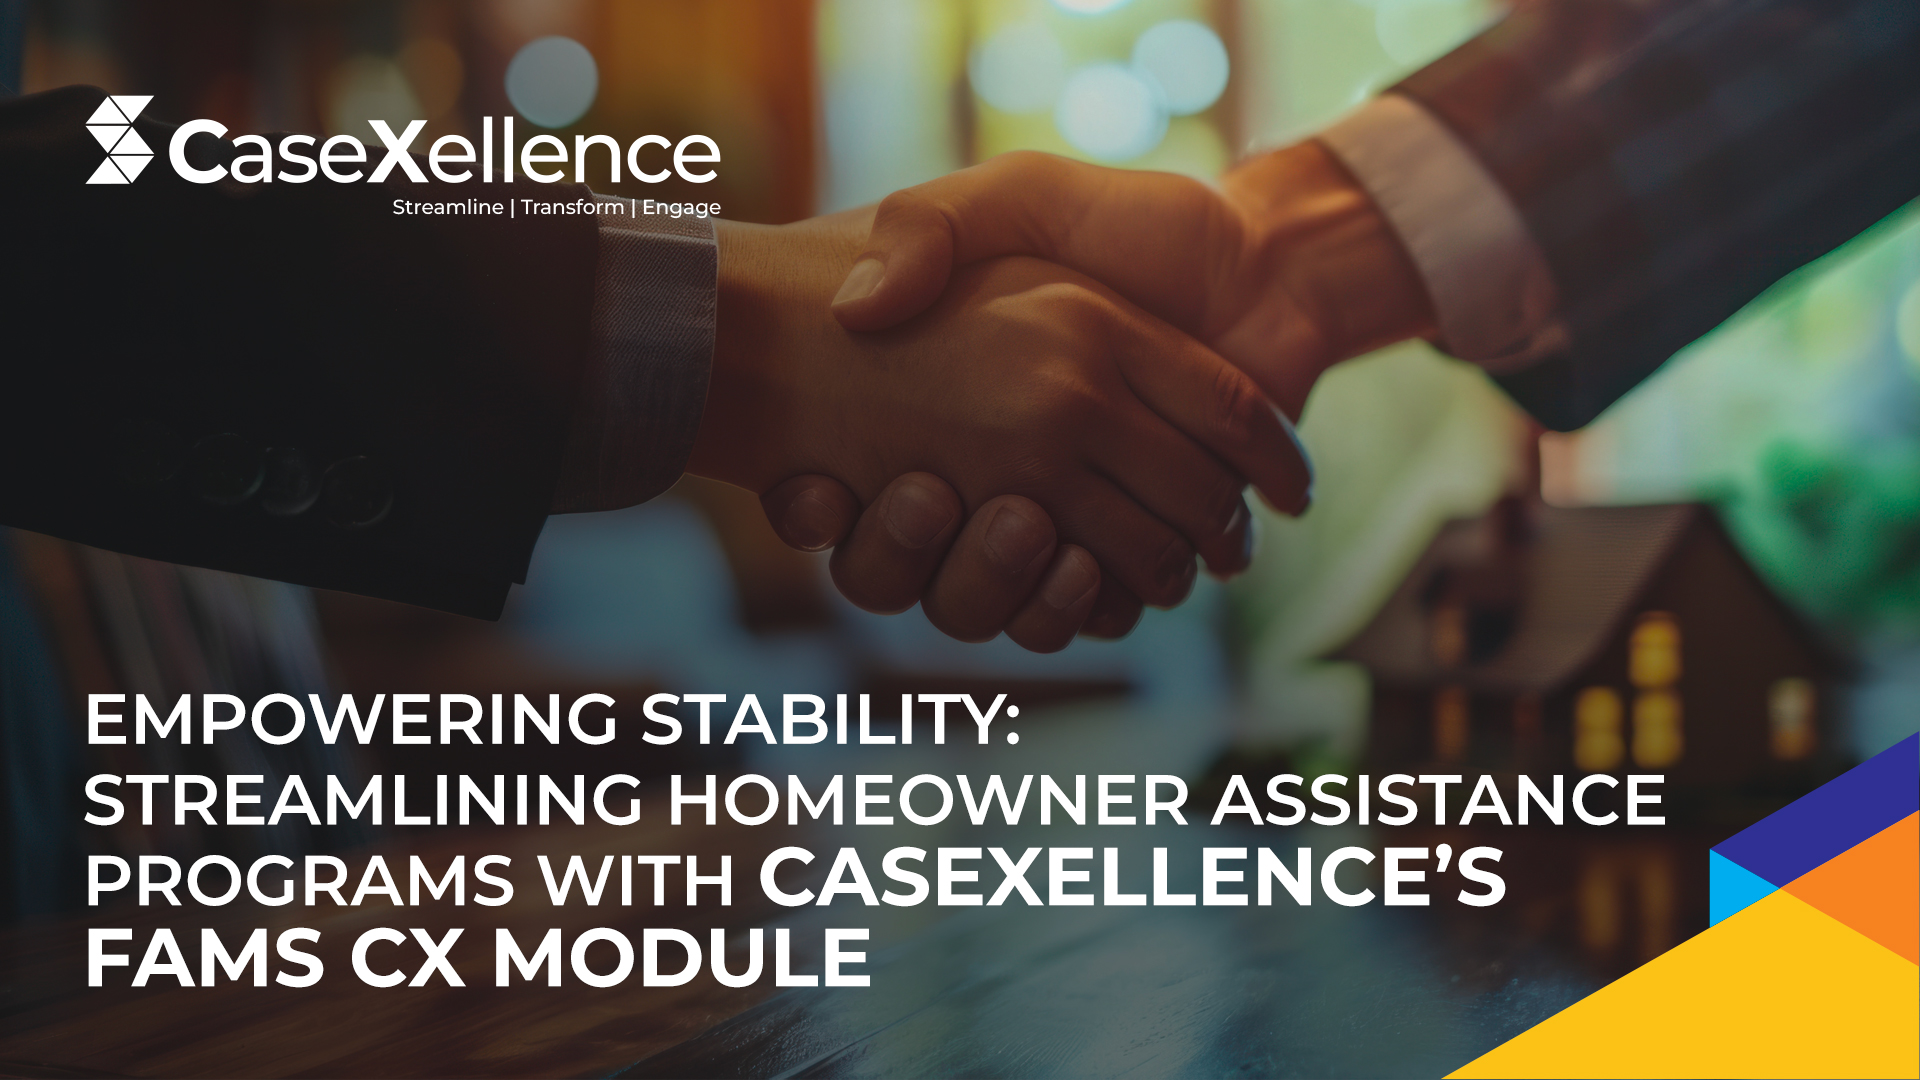 Empowering Stability: Streamlining Homeowner Assistance Programs with CaseXellence’s FAMS CX Module